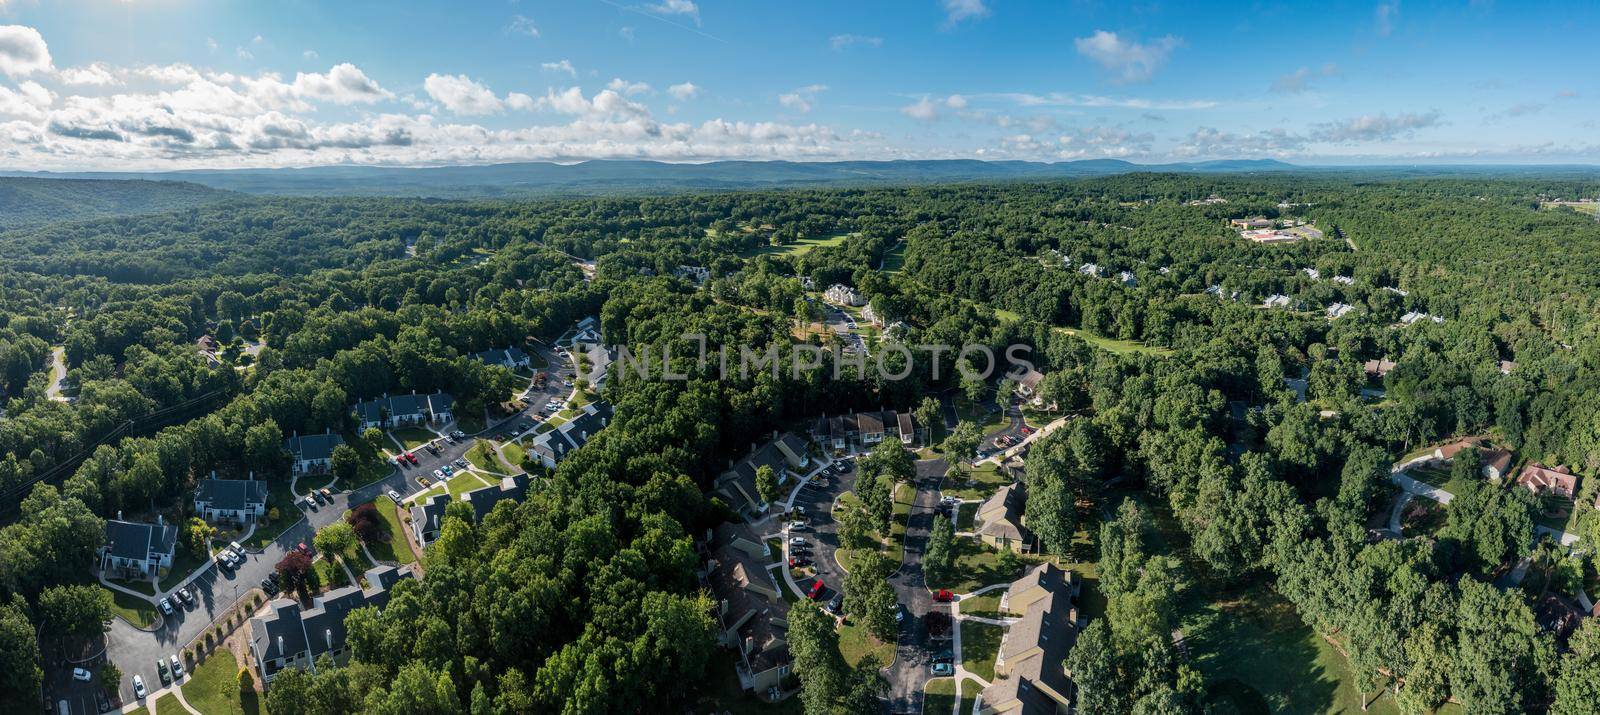 Aerial view of a vacation residential development in Tennessee, USA by steheap